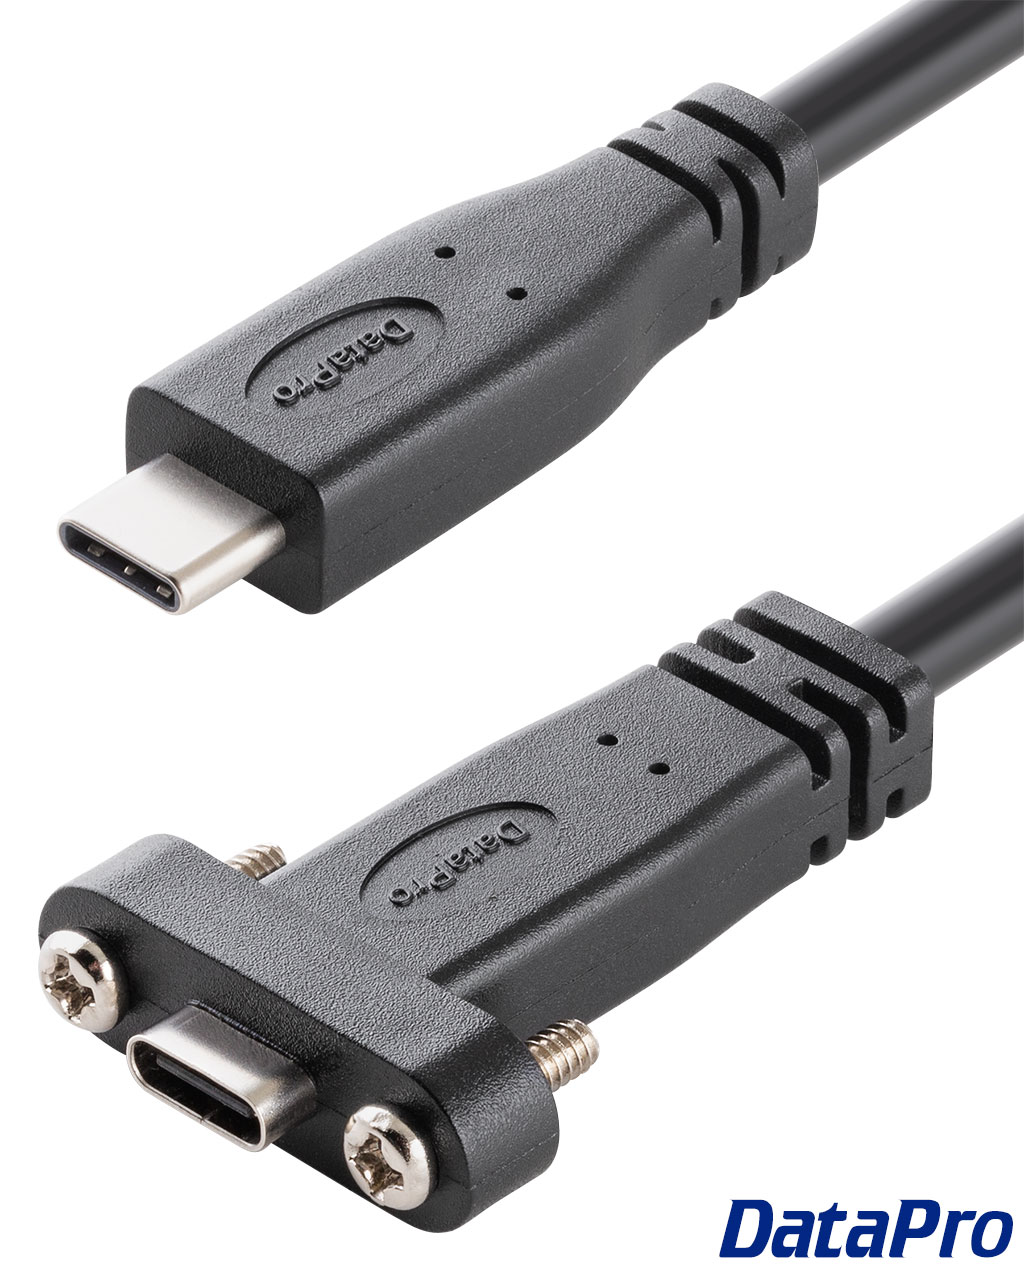 New! Panel Mount USB4 and Thunderbolt USB-C Cables